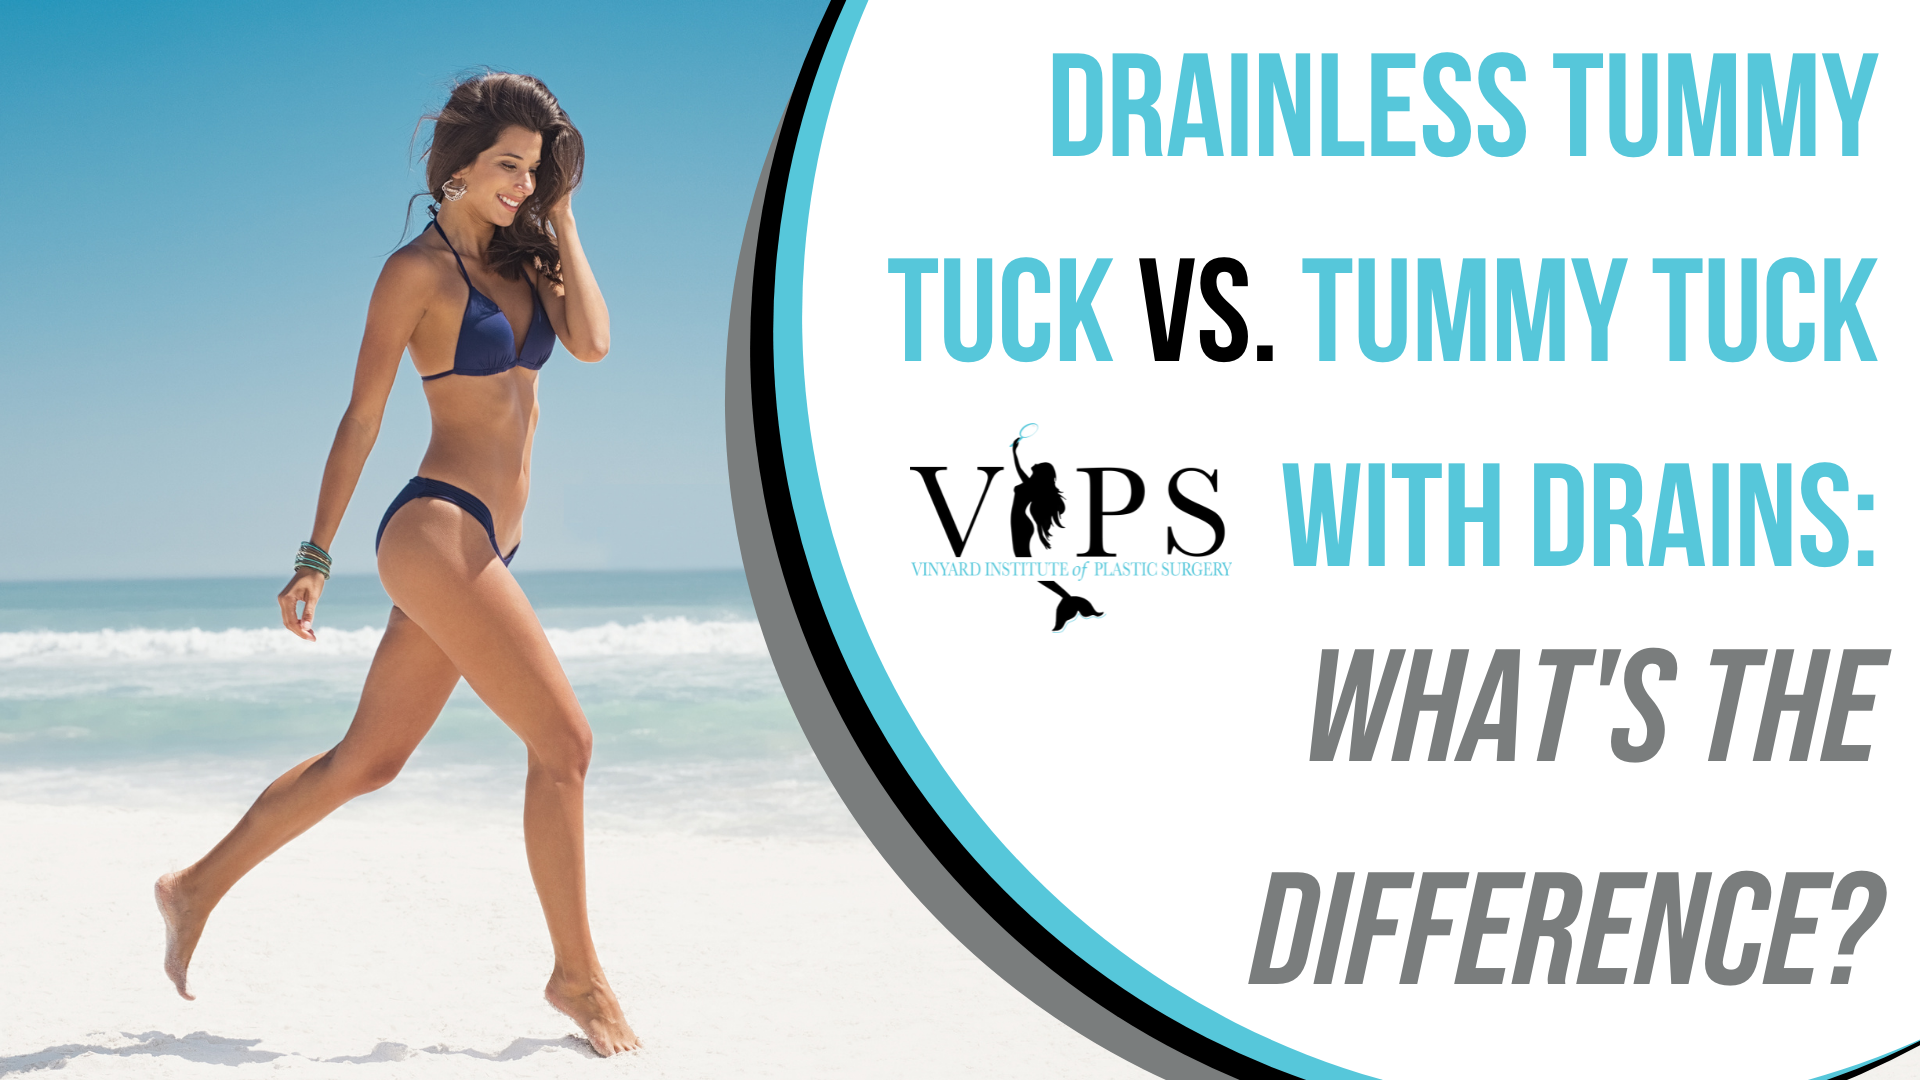 Drainless Tummy Tuck vs. Tummy Tuck With Drains: What's The Difference?